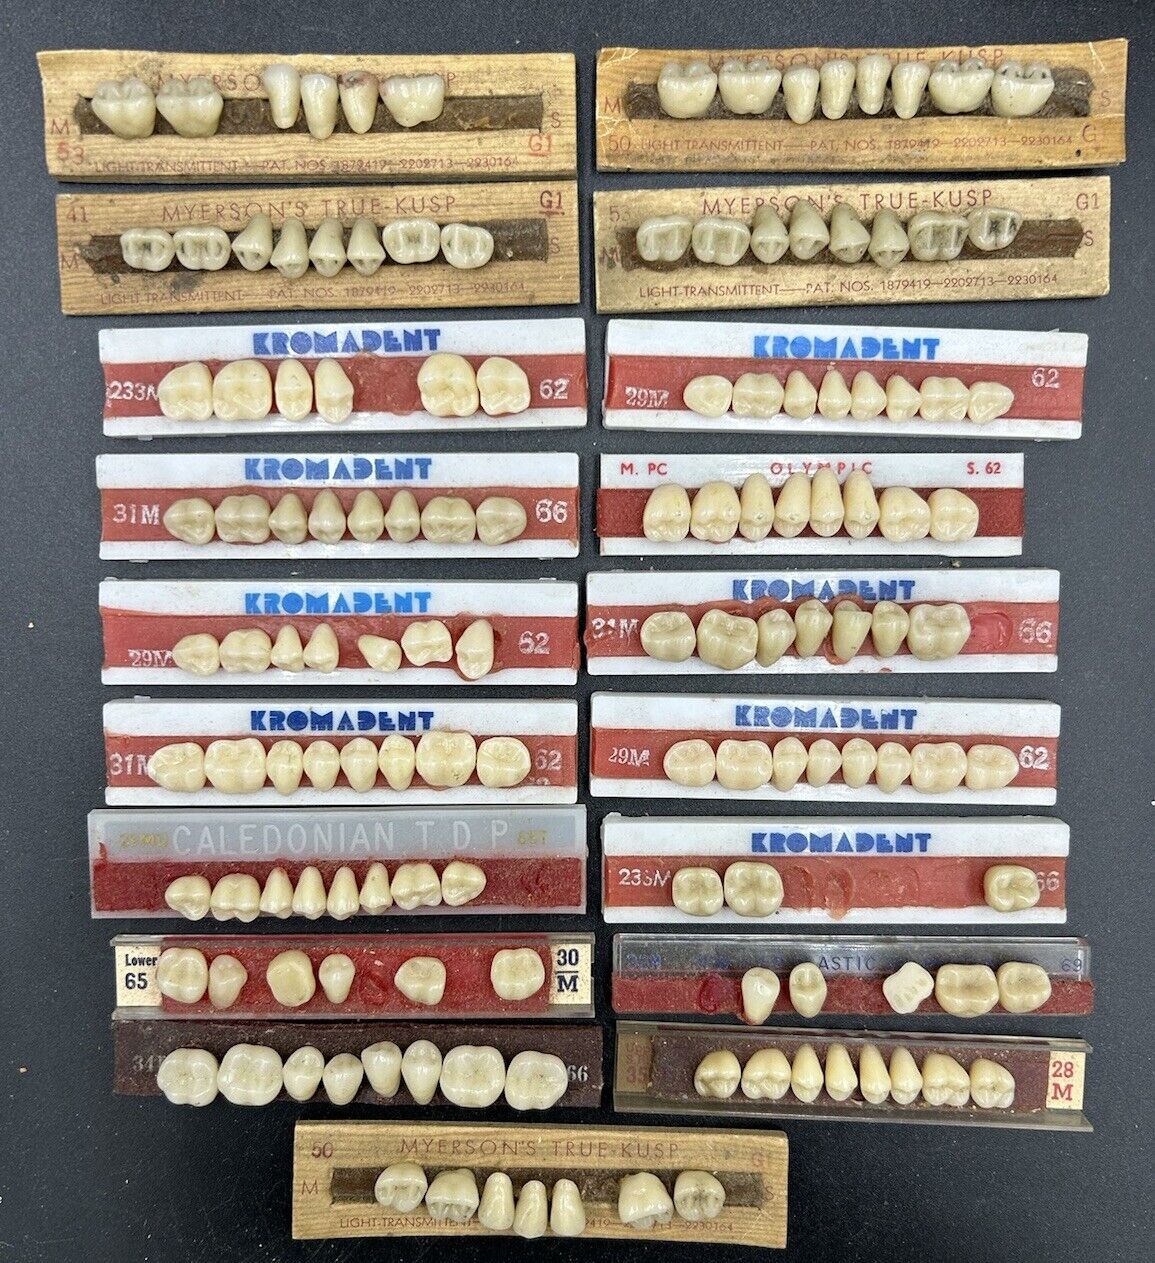 Vintage Antique KROMODENT Dental Tooth Shade Guides - Oddity (ALL ONE PRICE)..